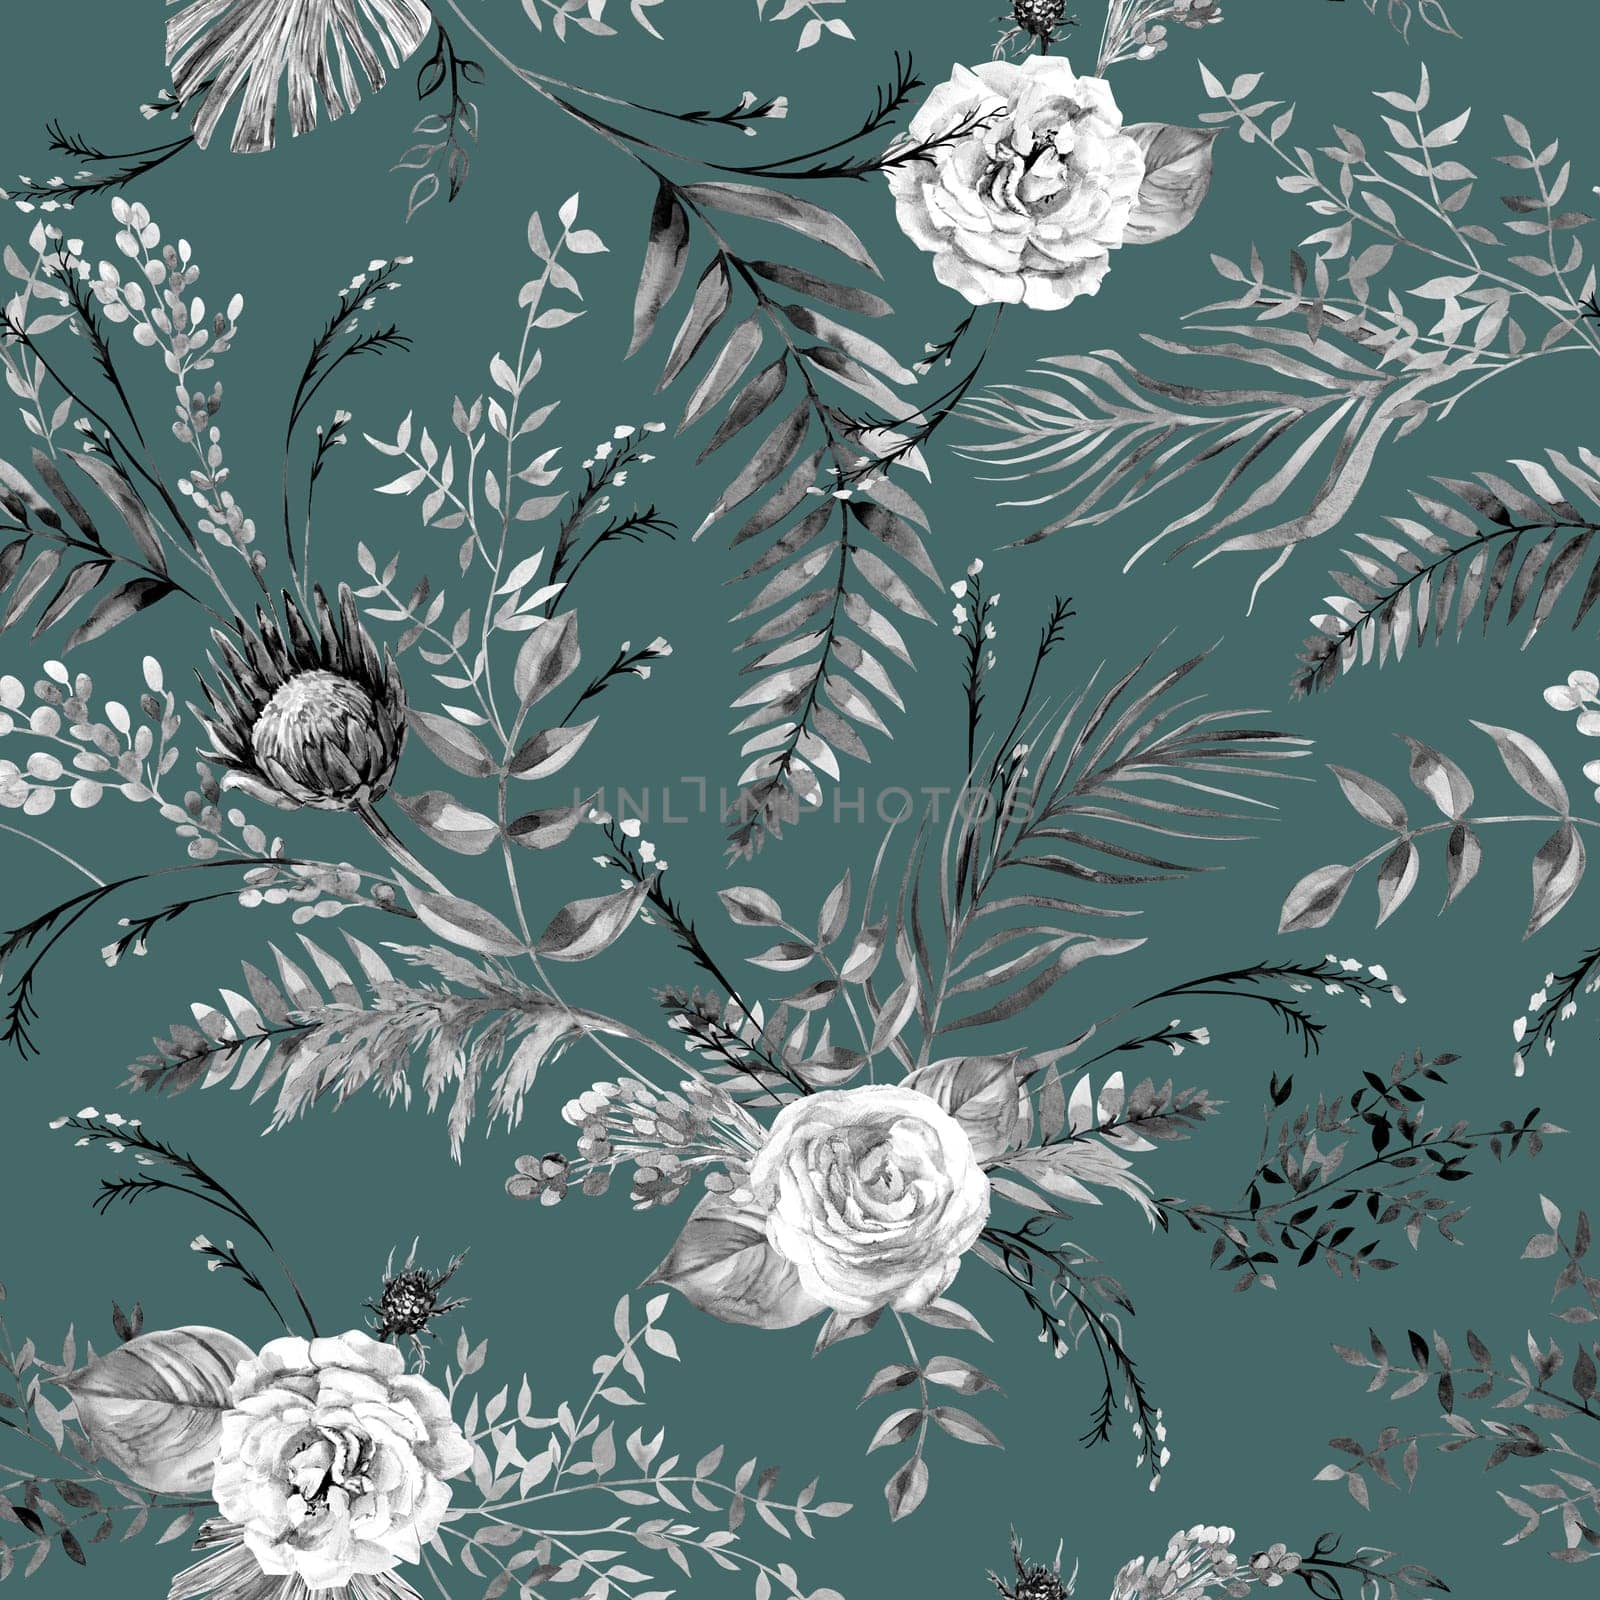 Watercolor vintage black and white seamless pattern with flowers of delicate roses and tropical palm leaves